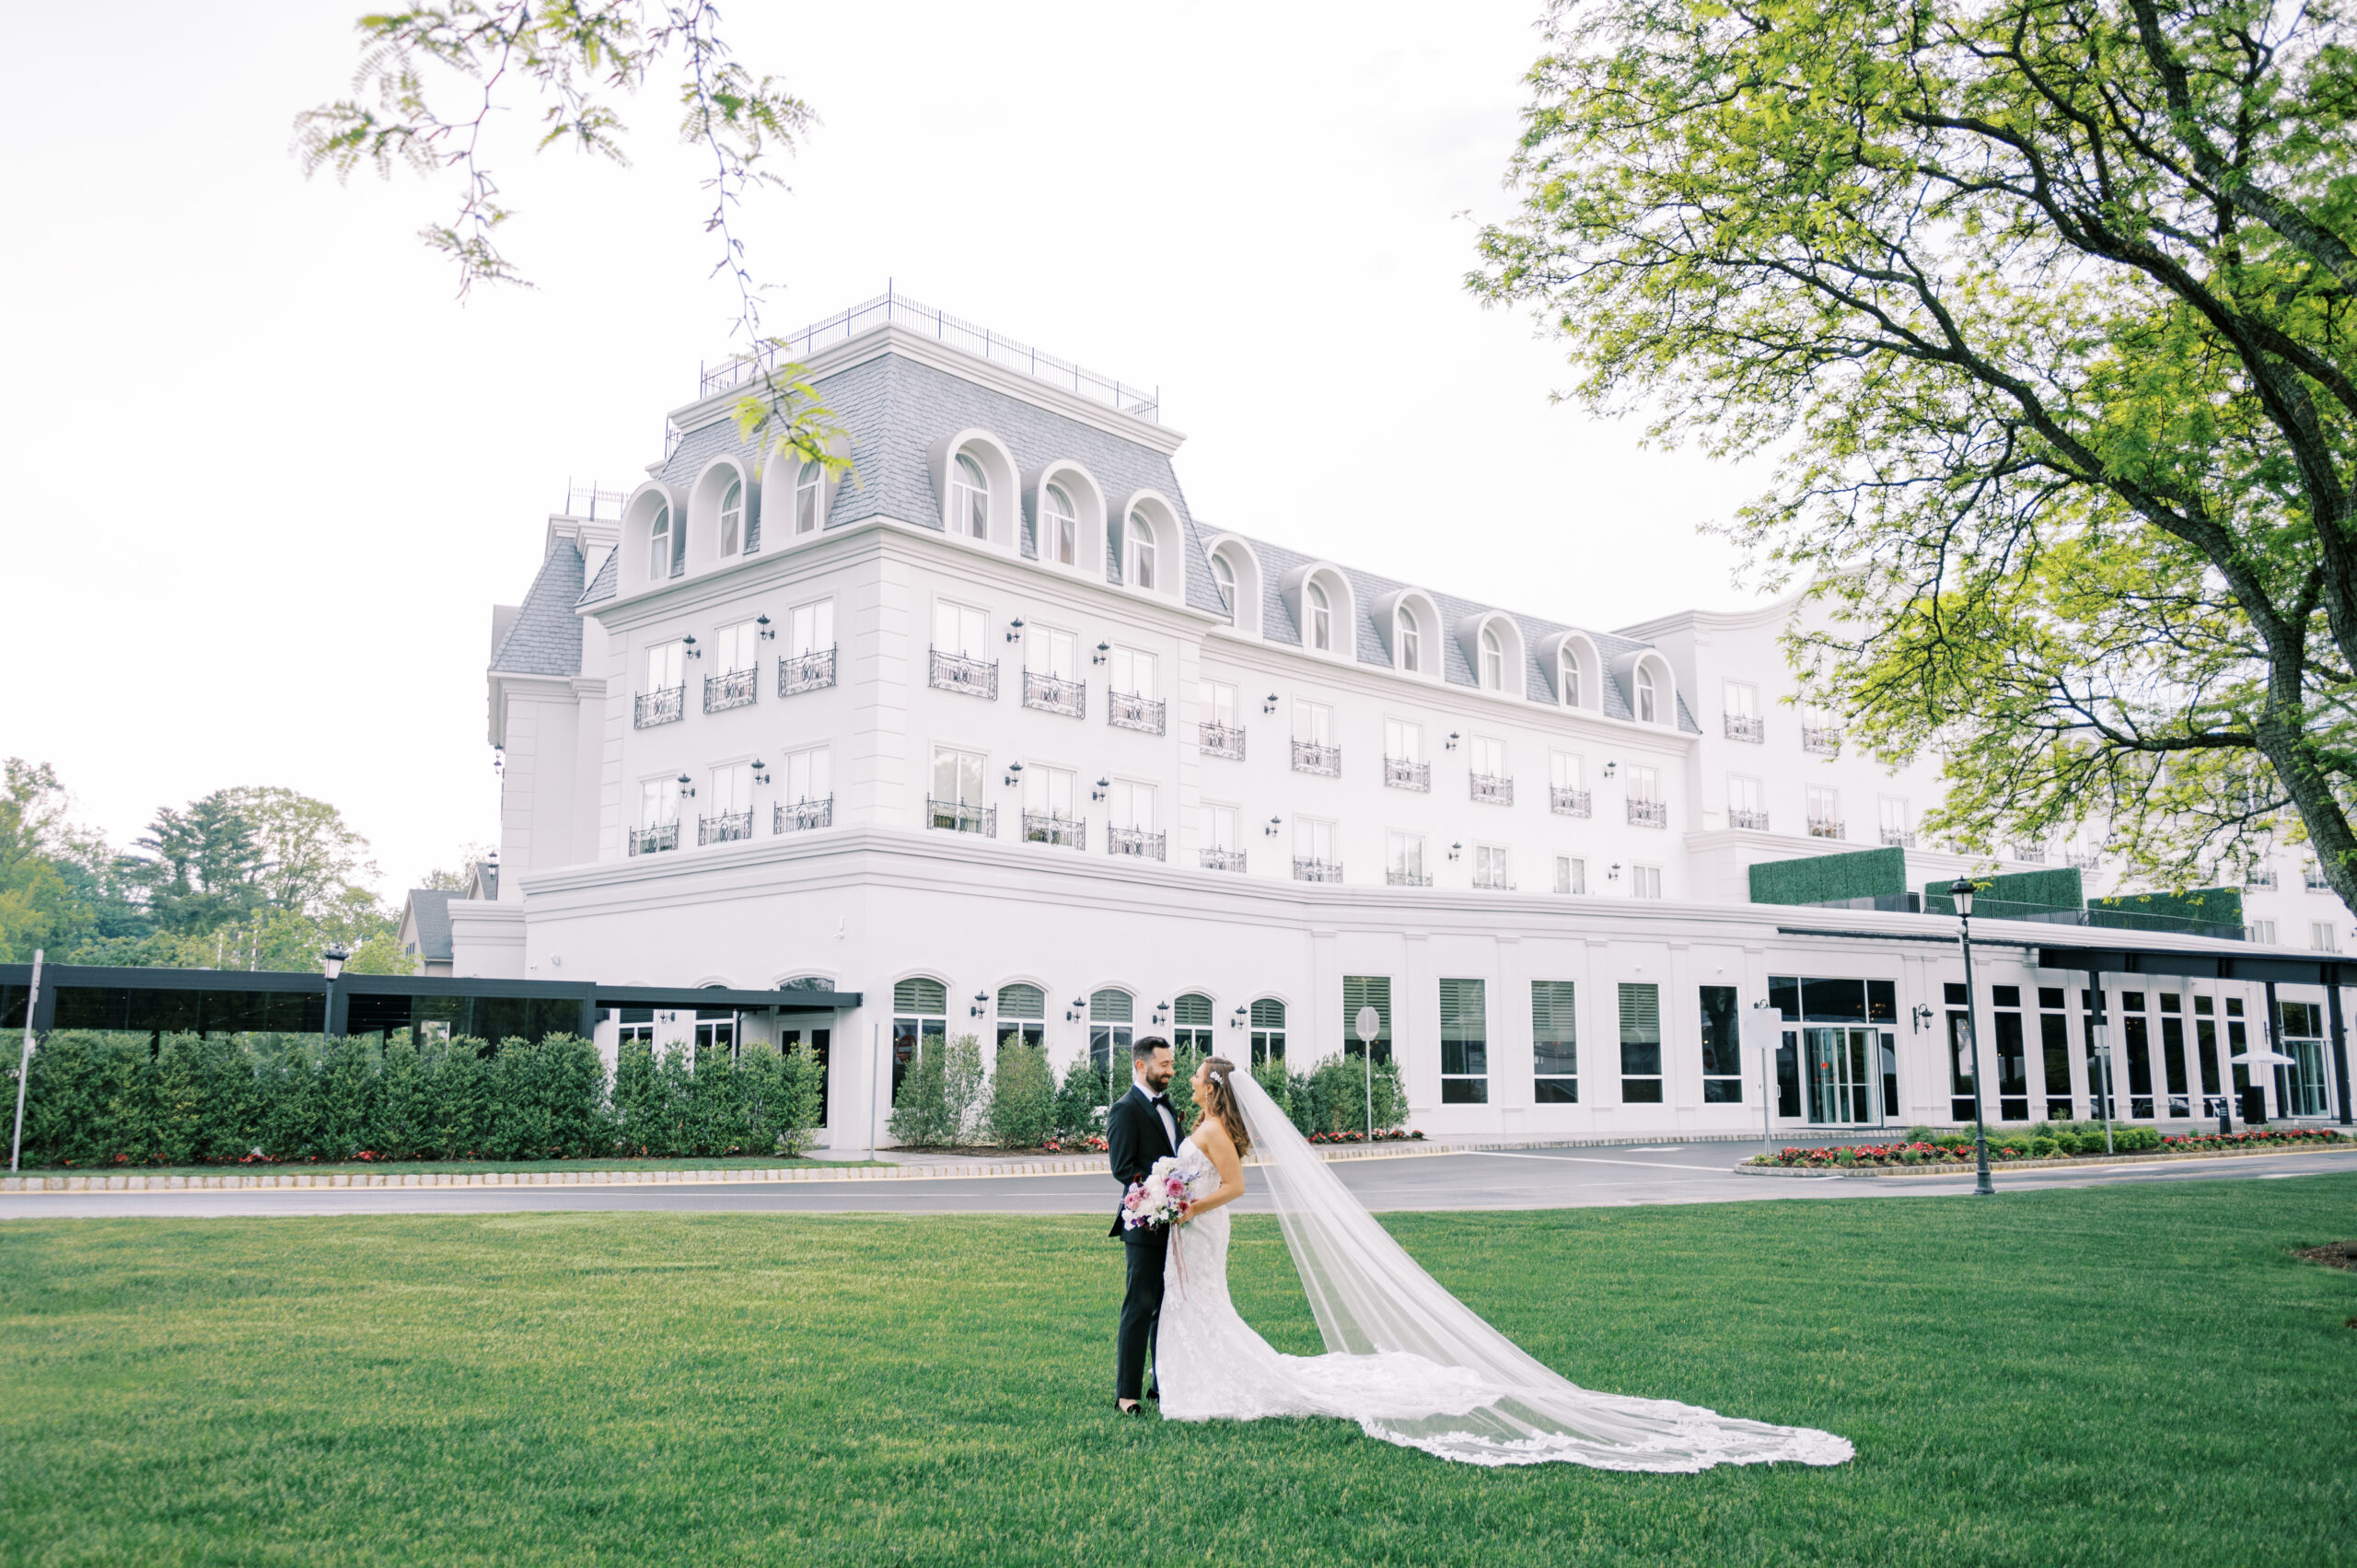 The couple poses on the lawn of the Chateau Grande Hotel.